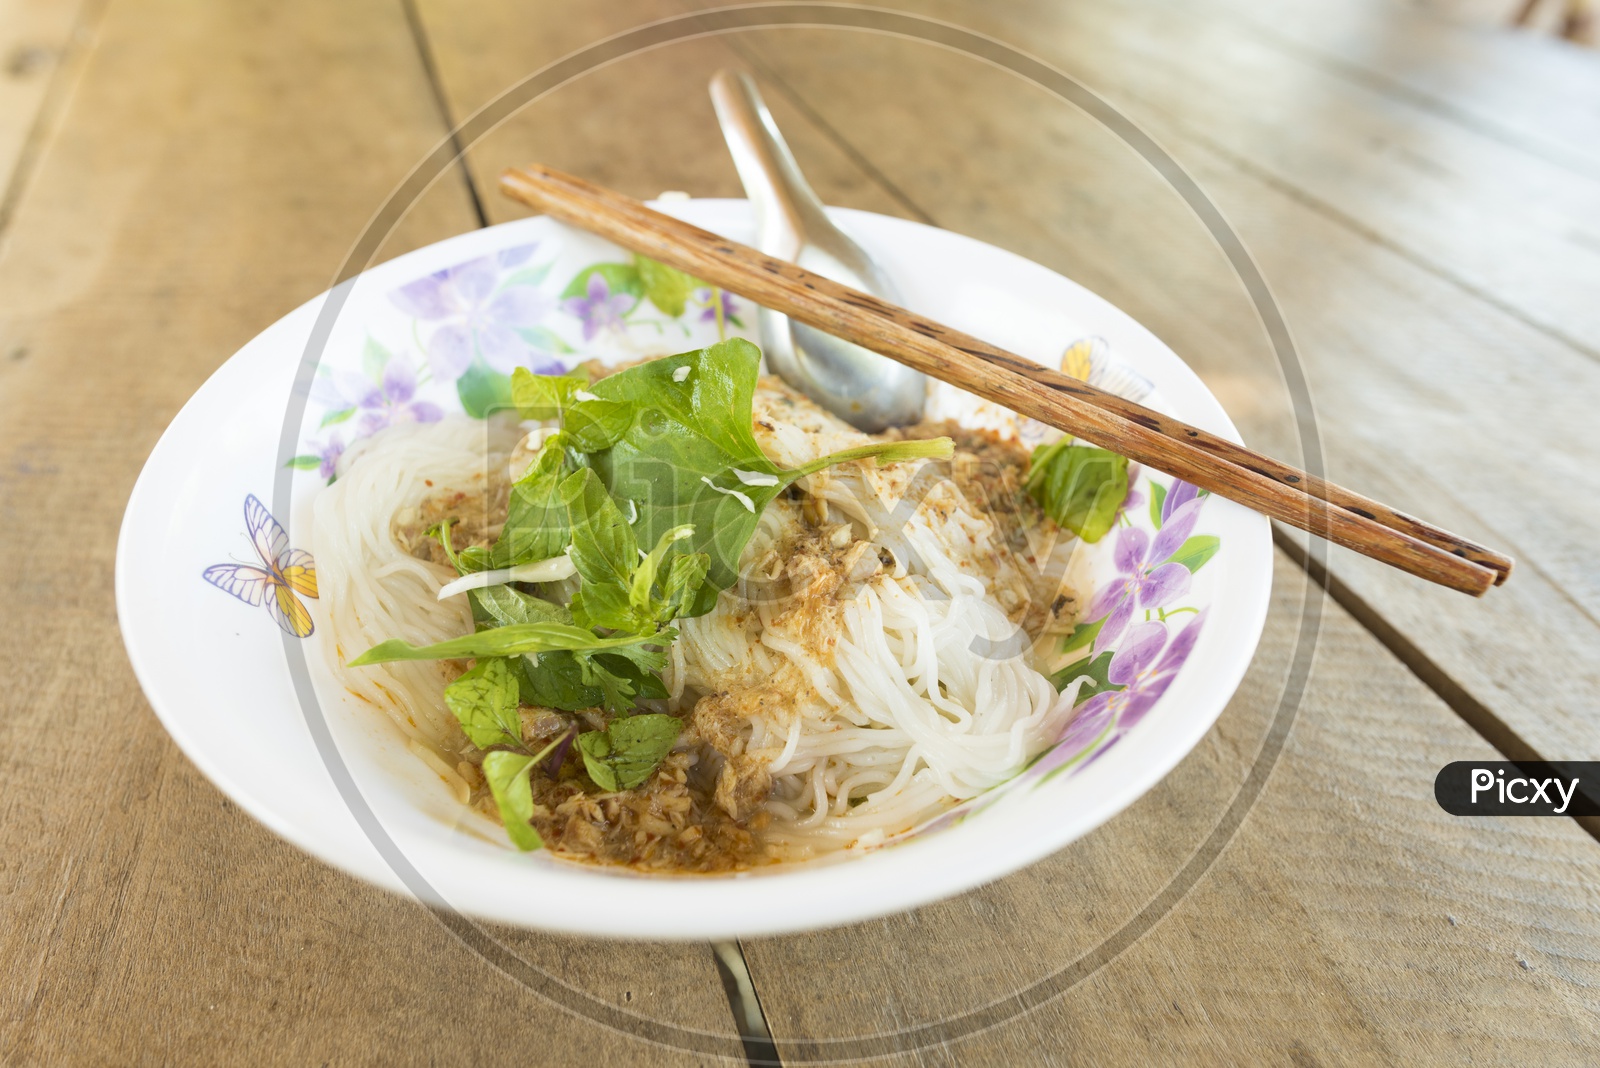 Noodles in a Plate on Wooden Table